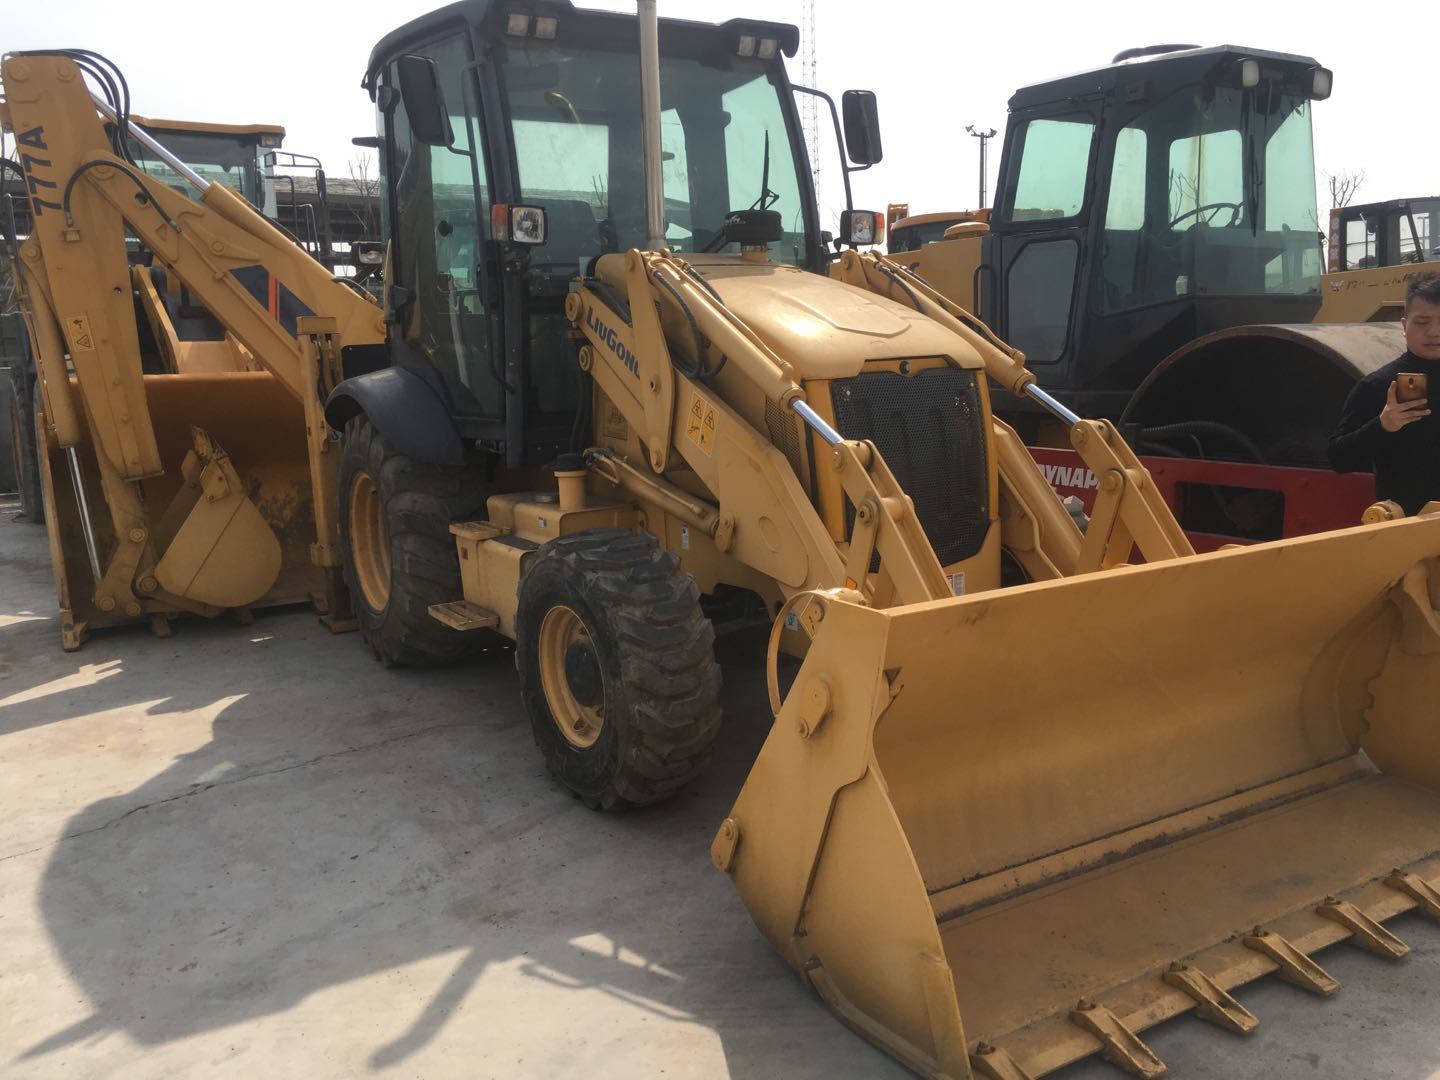 Used Liugong Backhoe Loader in Very Good Condition